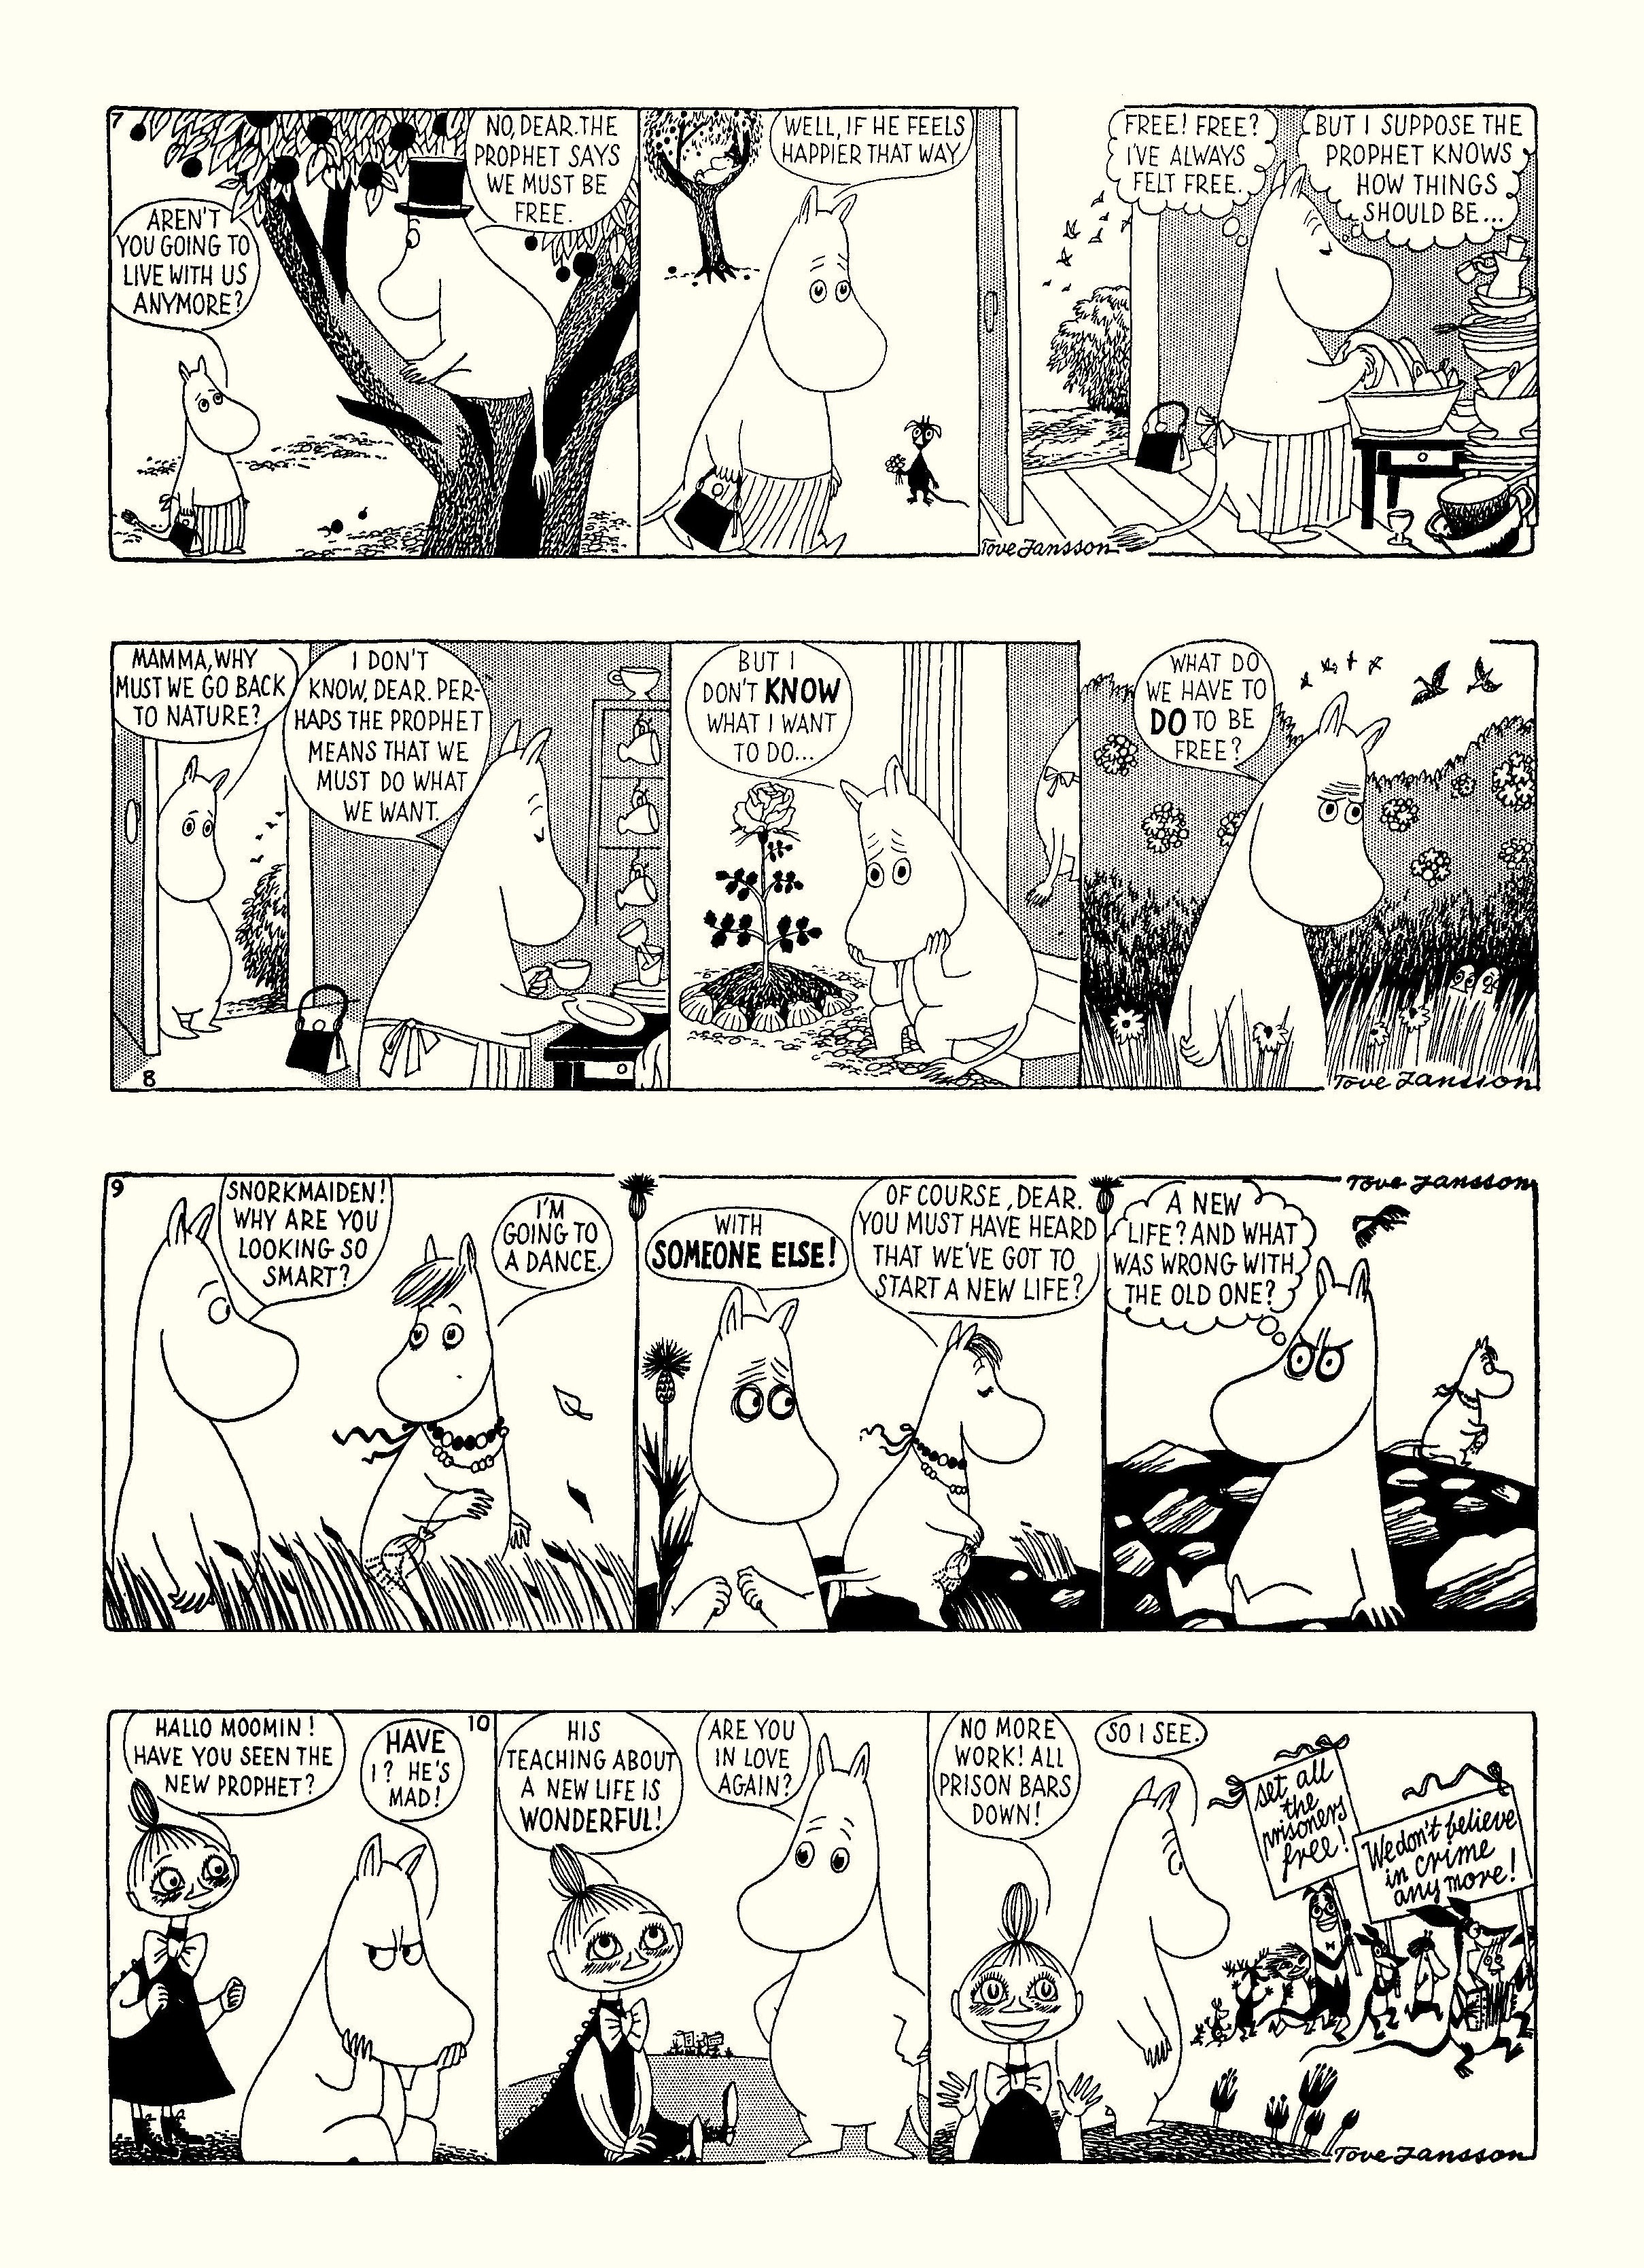 Read online Moomin: The Complete Tove Jansson Comic Strip comic -  Issue # TPB 2 - 66